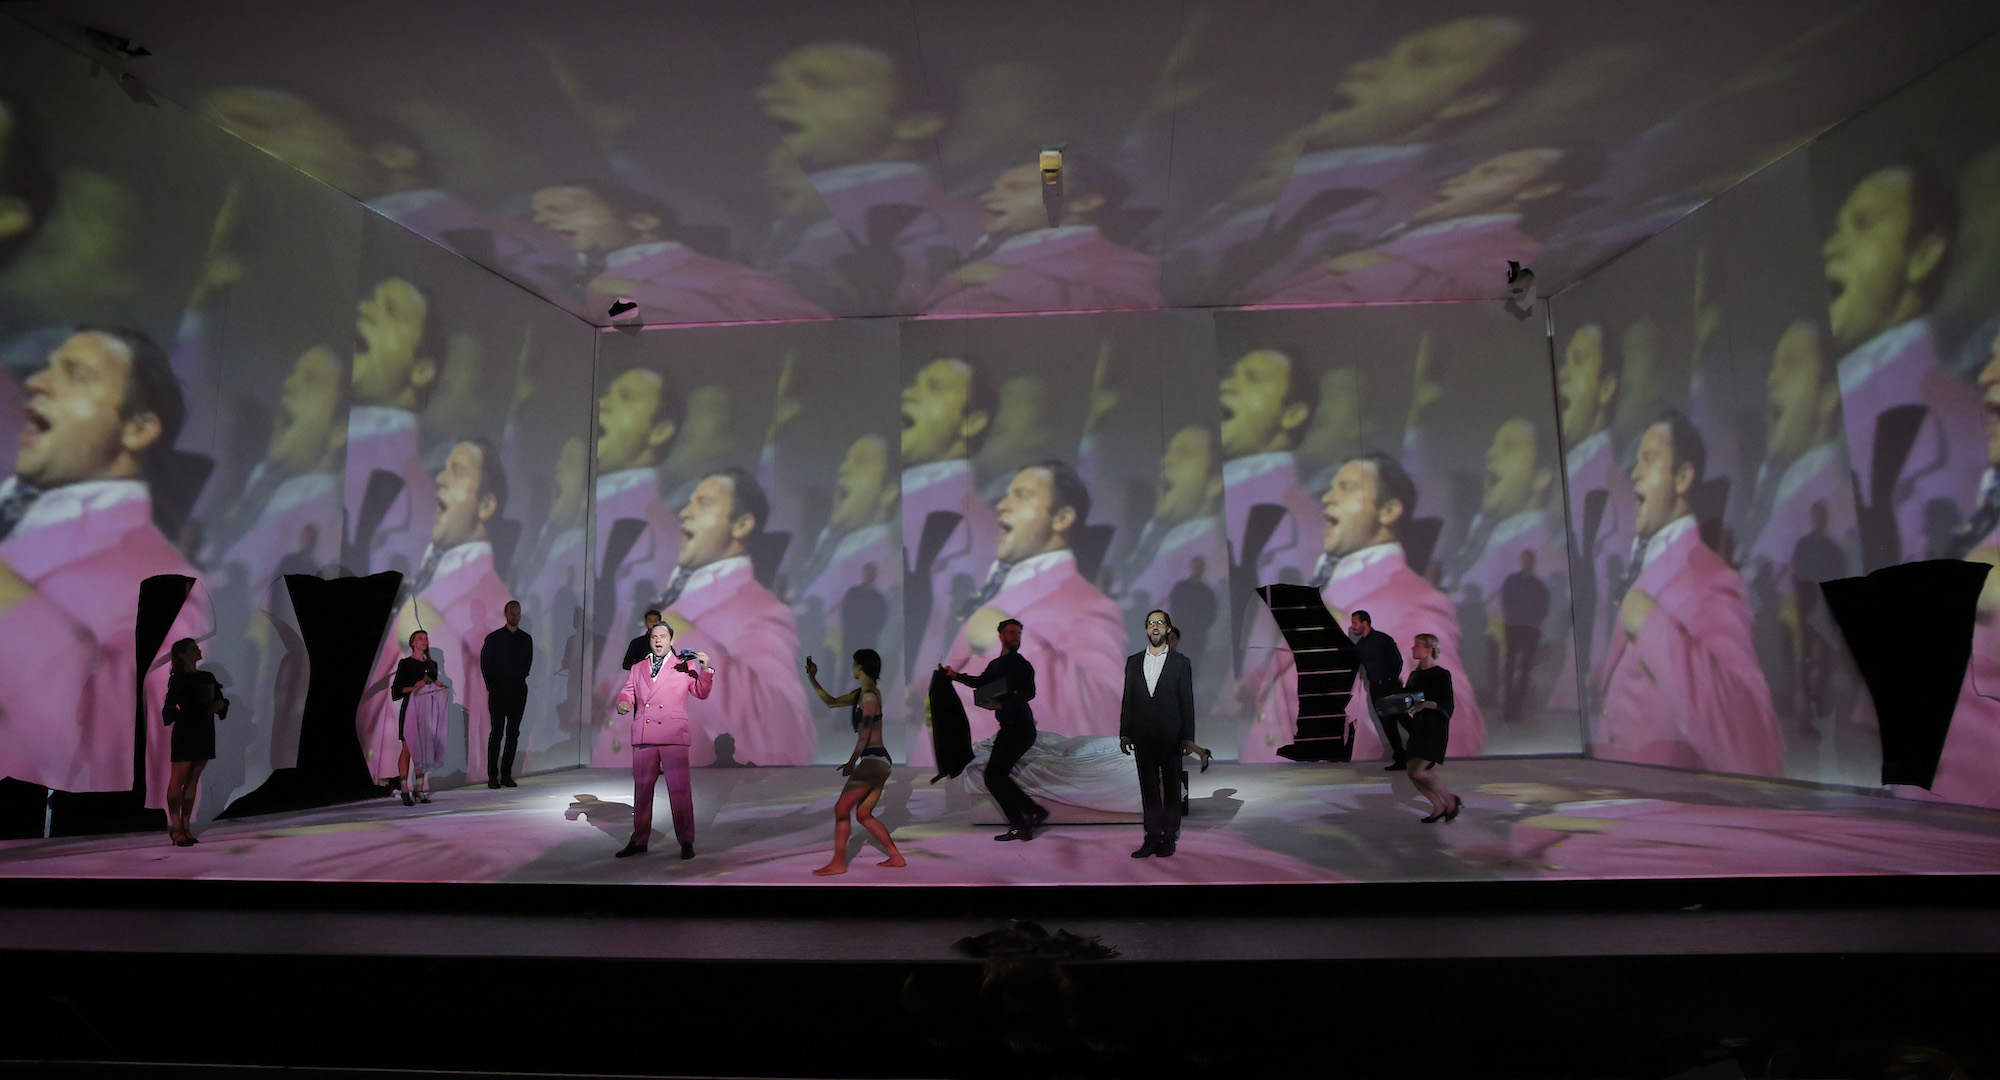 Multiple members of the cast look at an actor singing in a pink suit, who is projected on the back of the stage multiple times, closing in on their face